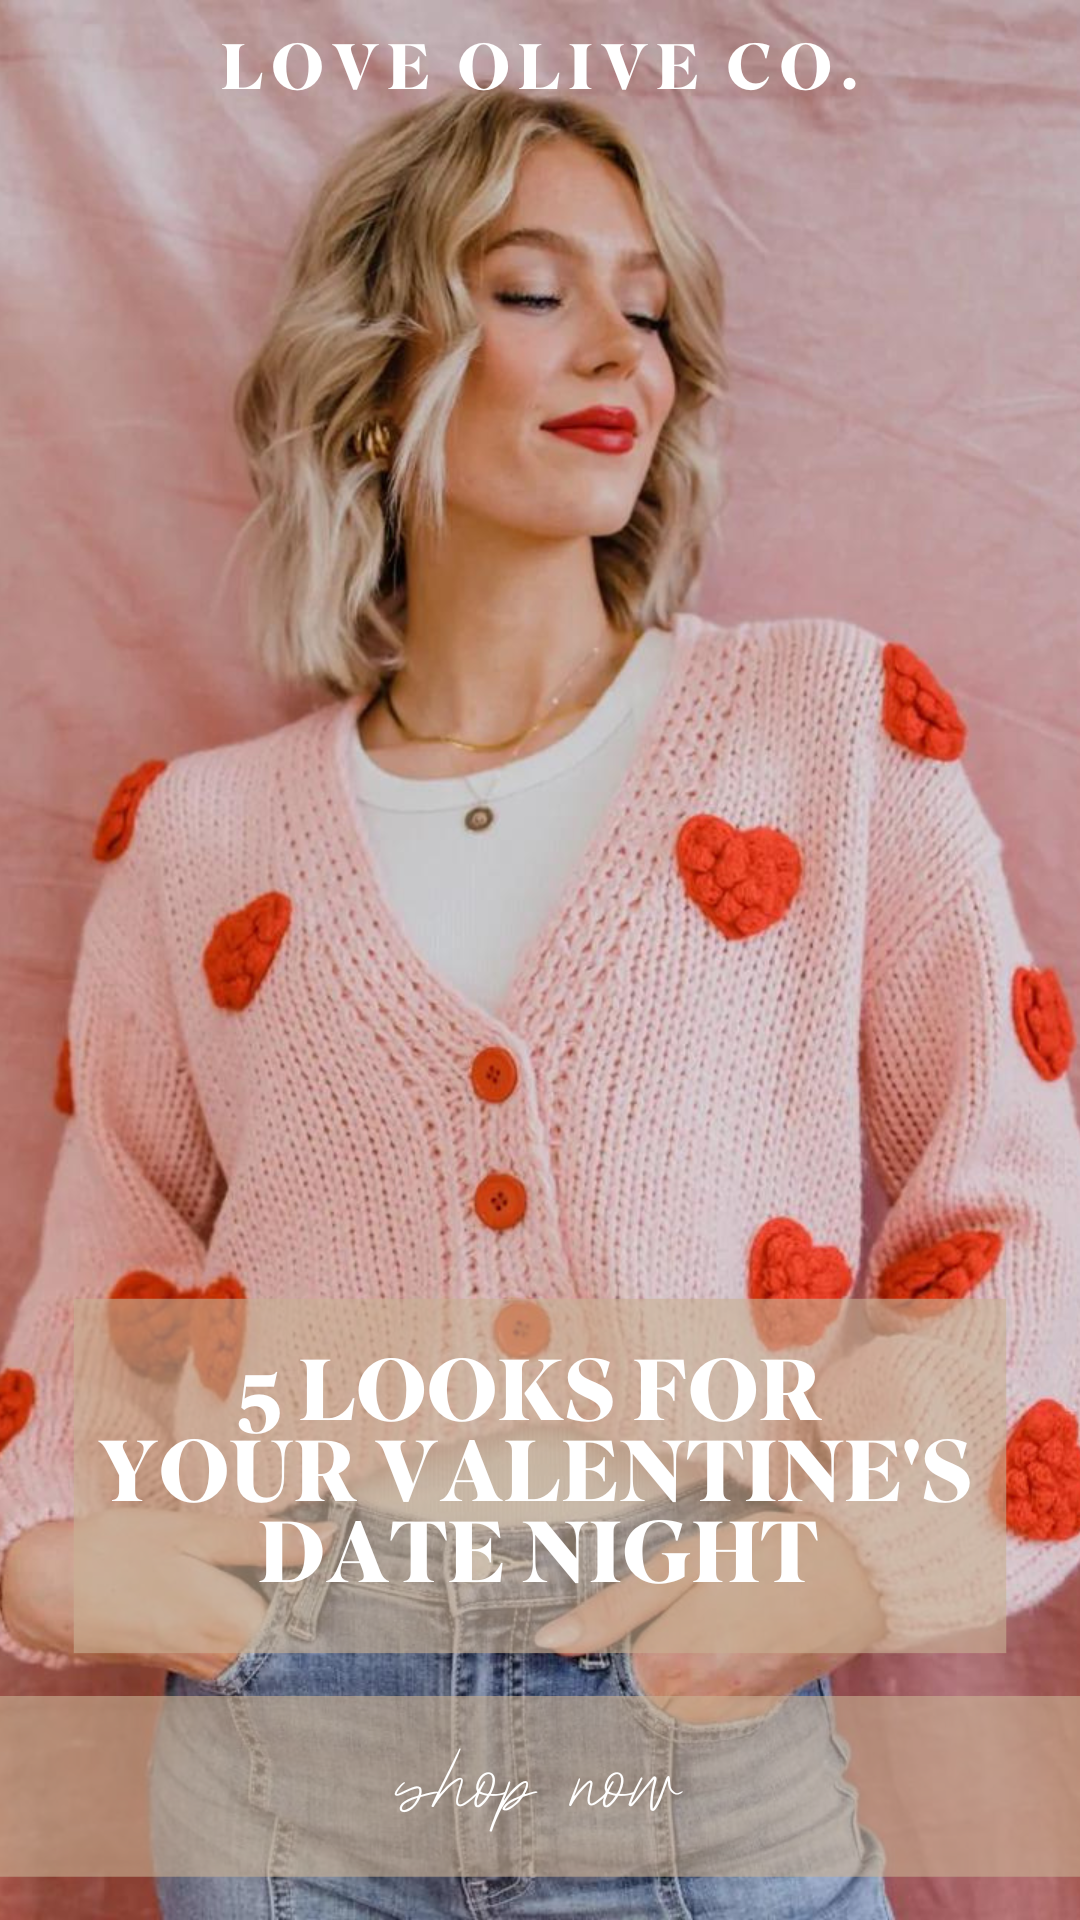 5 looks for your valentine's date night. www.loveoliveco.com